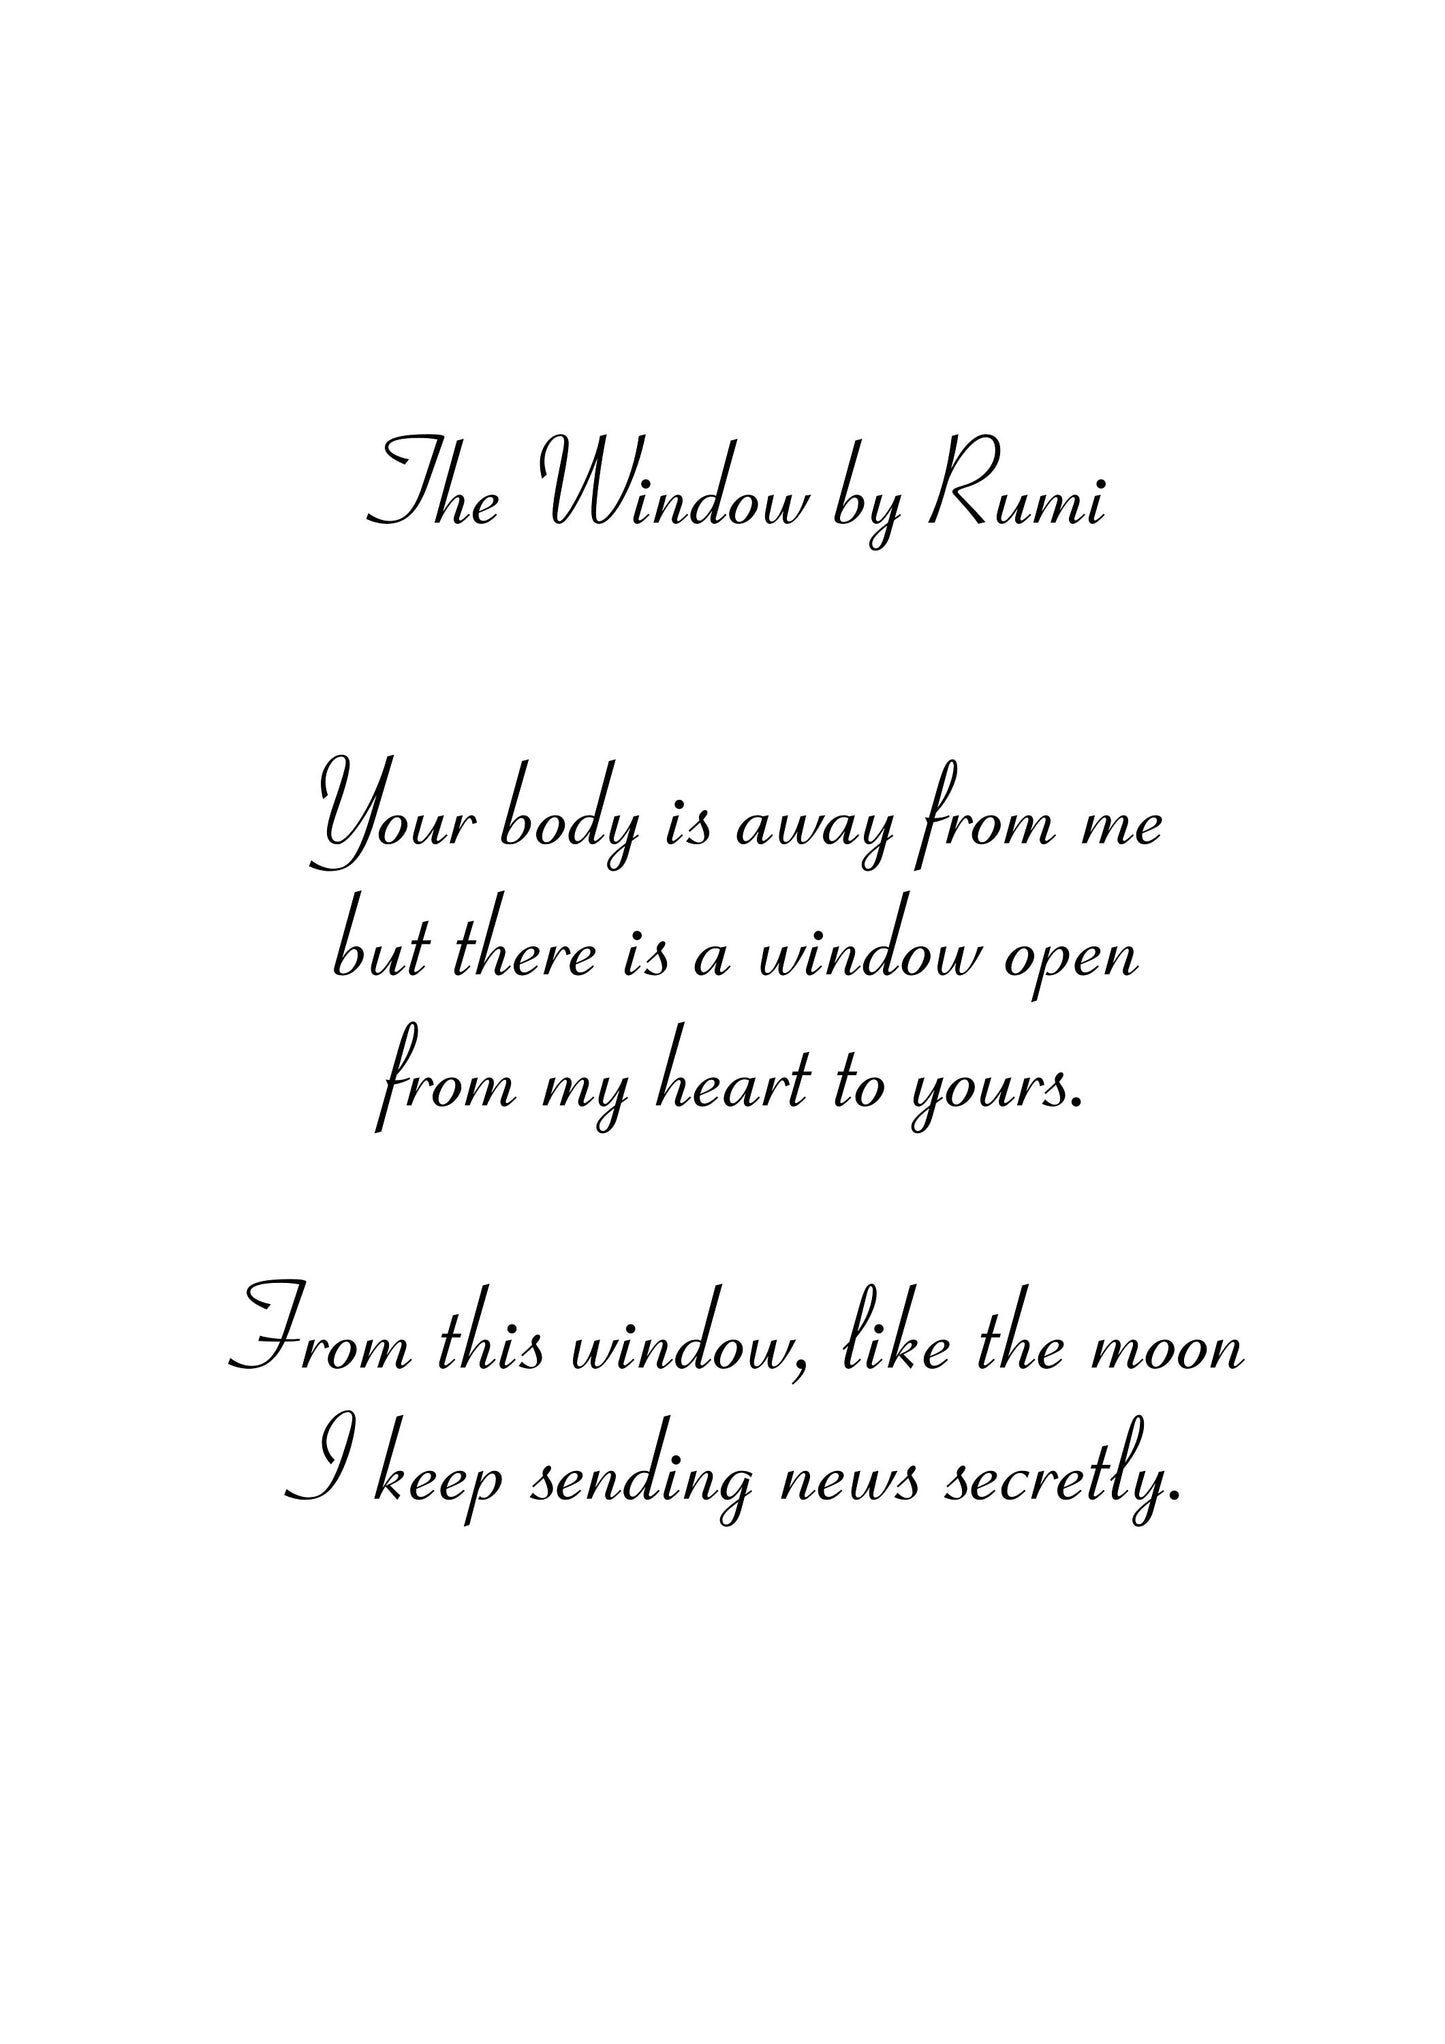 The Window by Rumi | Poem by Rumi | Rumi Quote Wall Art | Grief Quote Wall Decor | Grief Poem Wall Art | Gift for grieving friend | Rumi Art